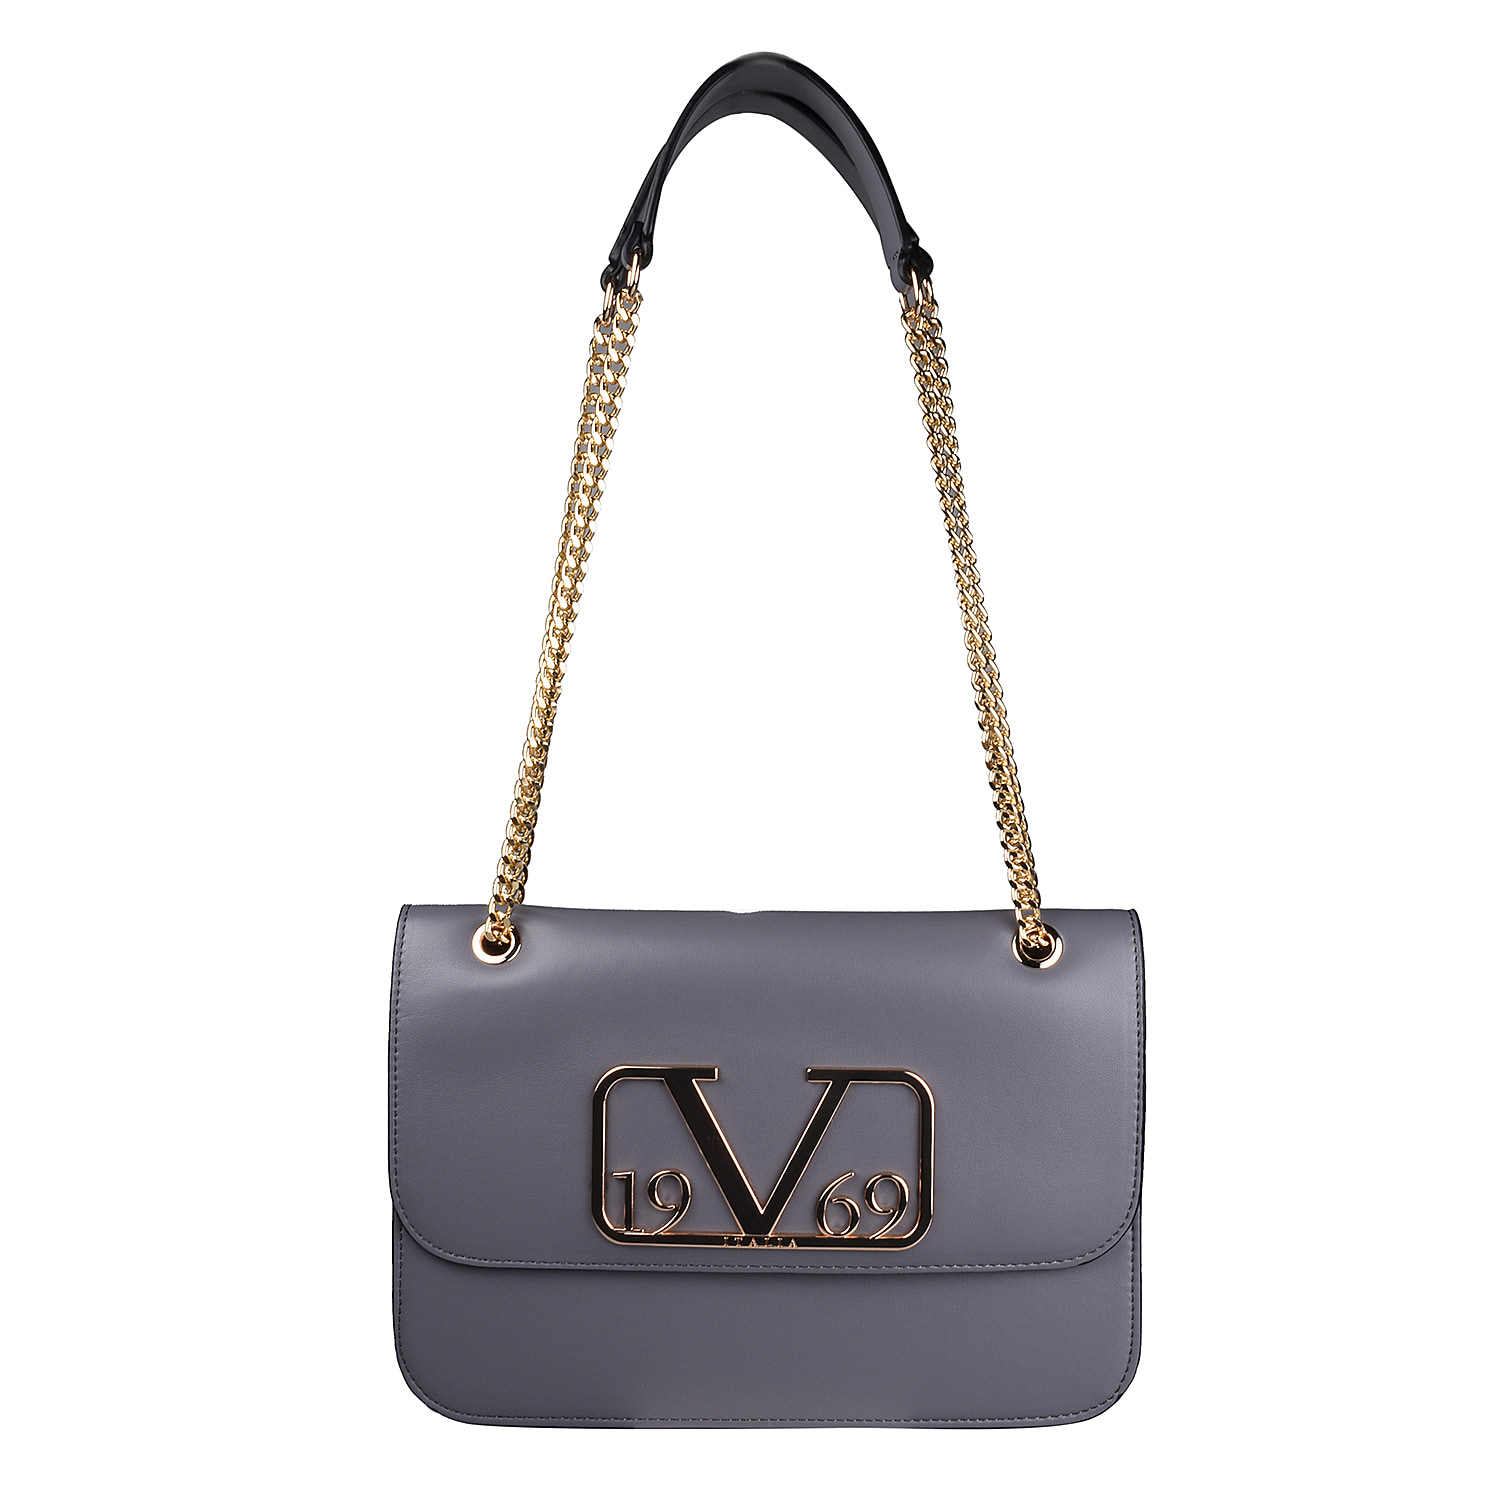 Buy Women's 19V69 Textured Tote Bag with Zip Closure Online | Centrepoint  Bahrain